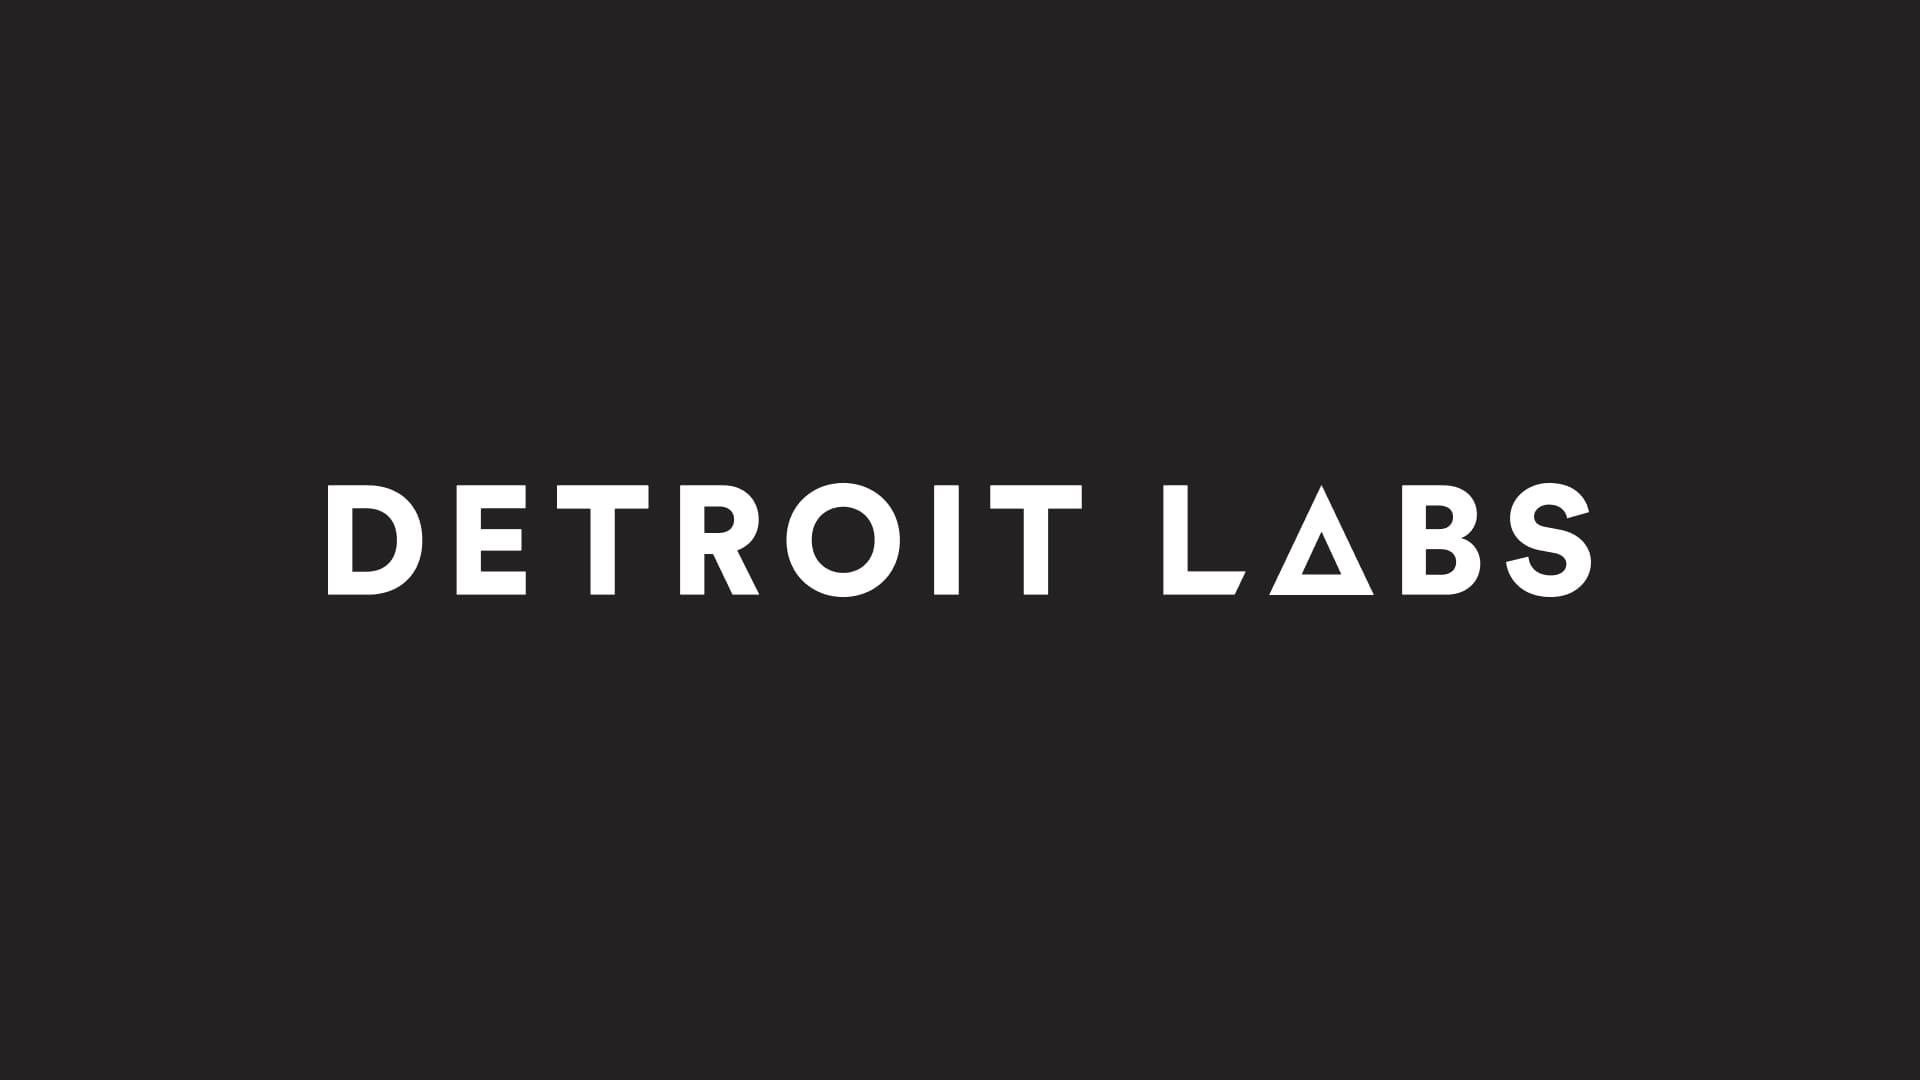 What’s in a mobile app company name? For Detroit Labs, it’s a badge of honor